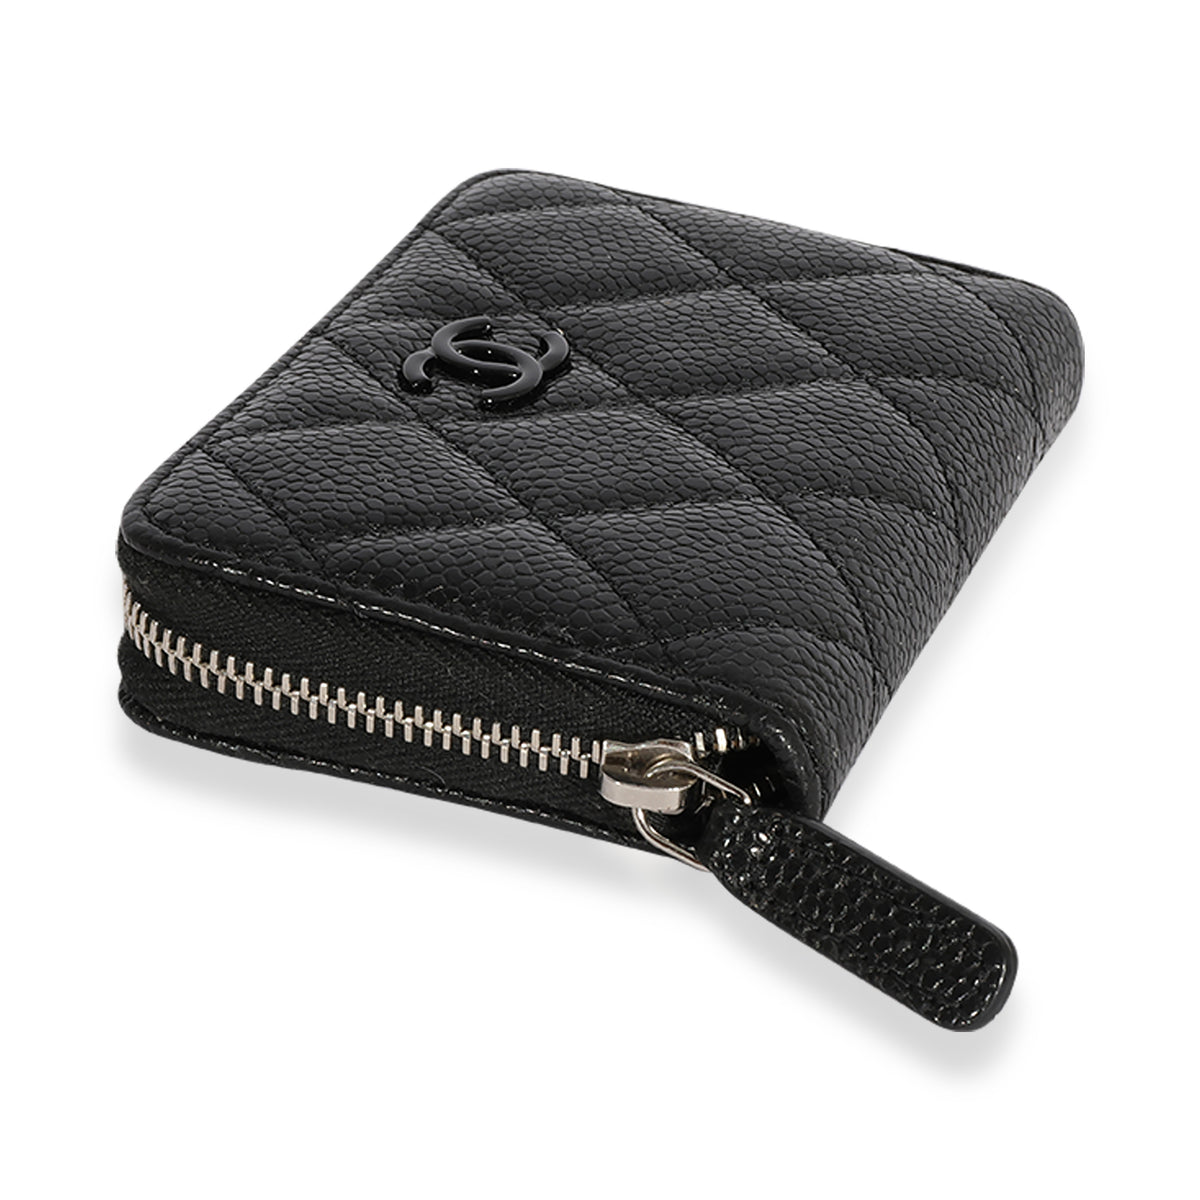 Buy [Used] CHANEL coin case coin purse with key chain leather black from  Japan - Buy authentic Plus exclusive items from Japan